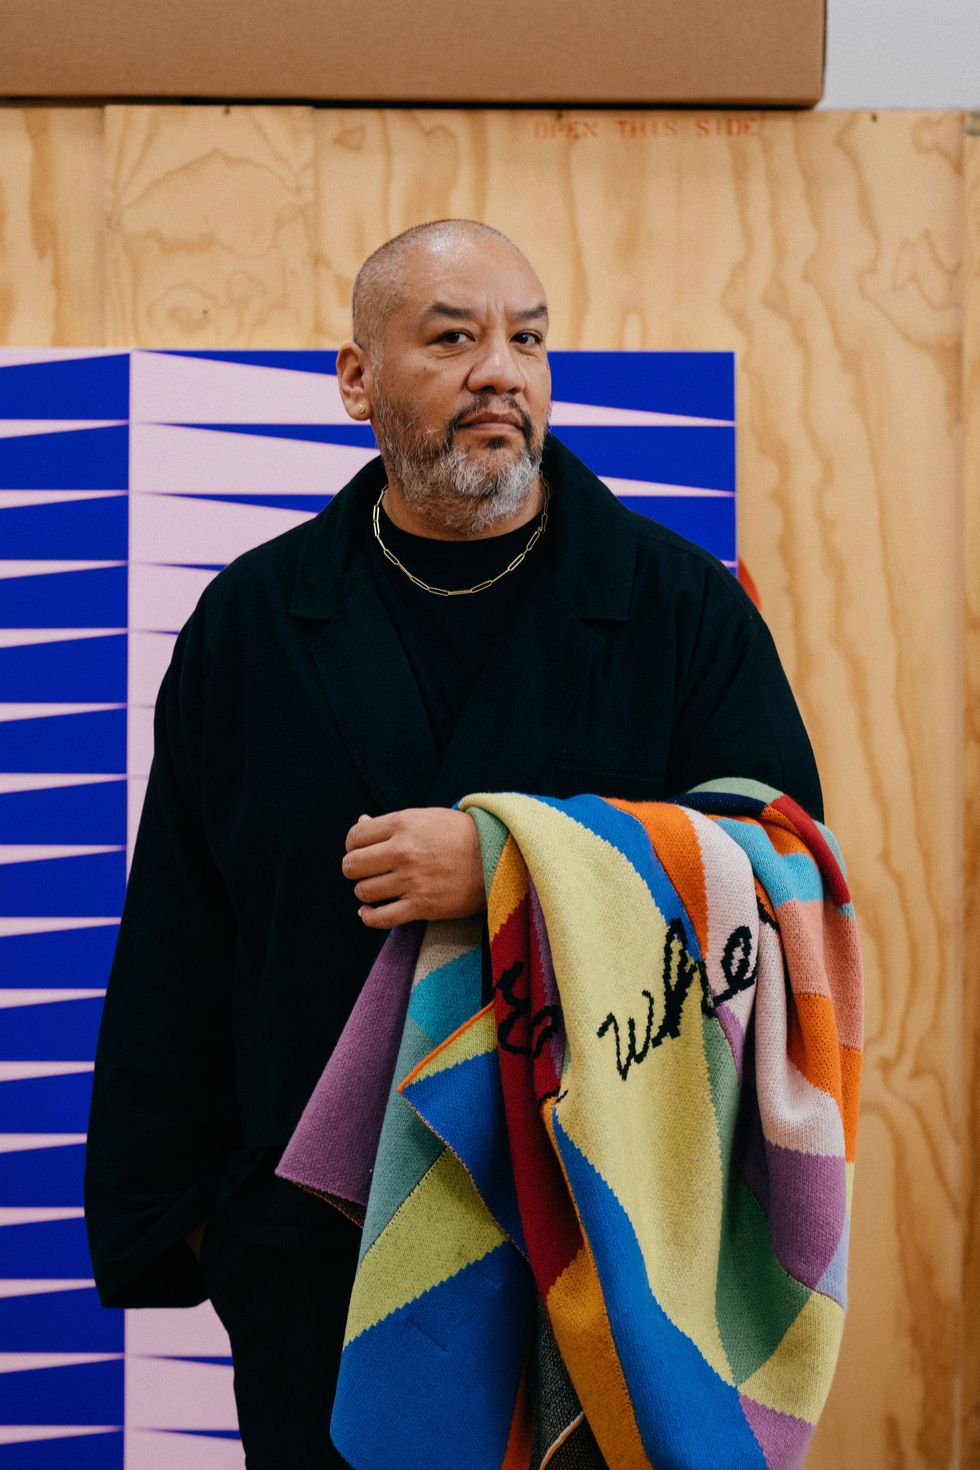 a man holding a colorful scarf